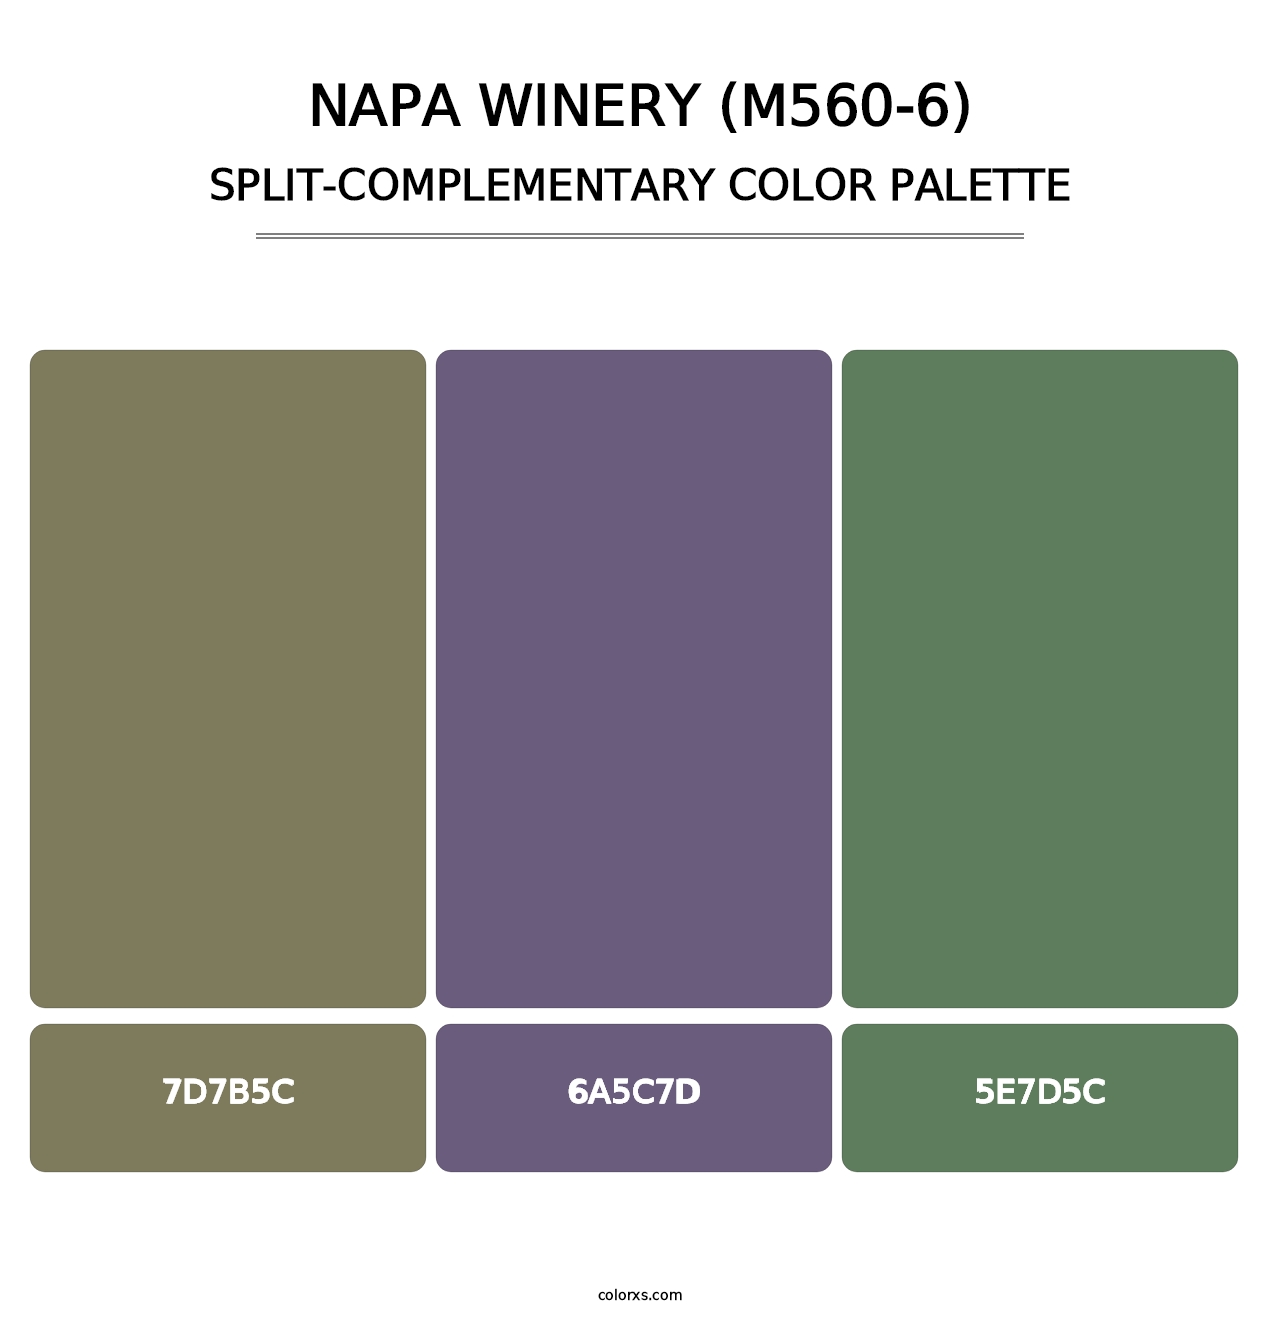 Napa Winery (M560-6) - Split-Complementary Color Palette